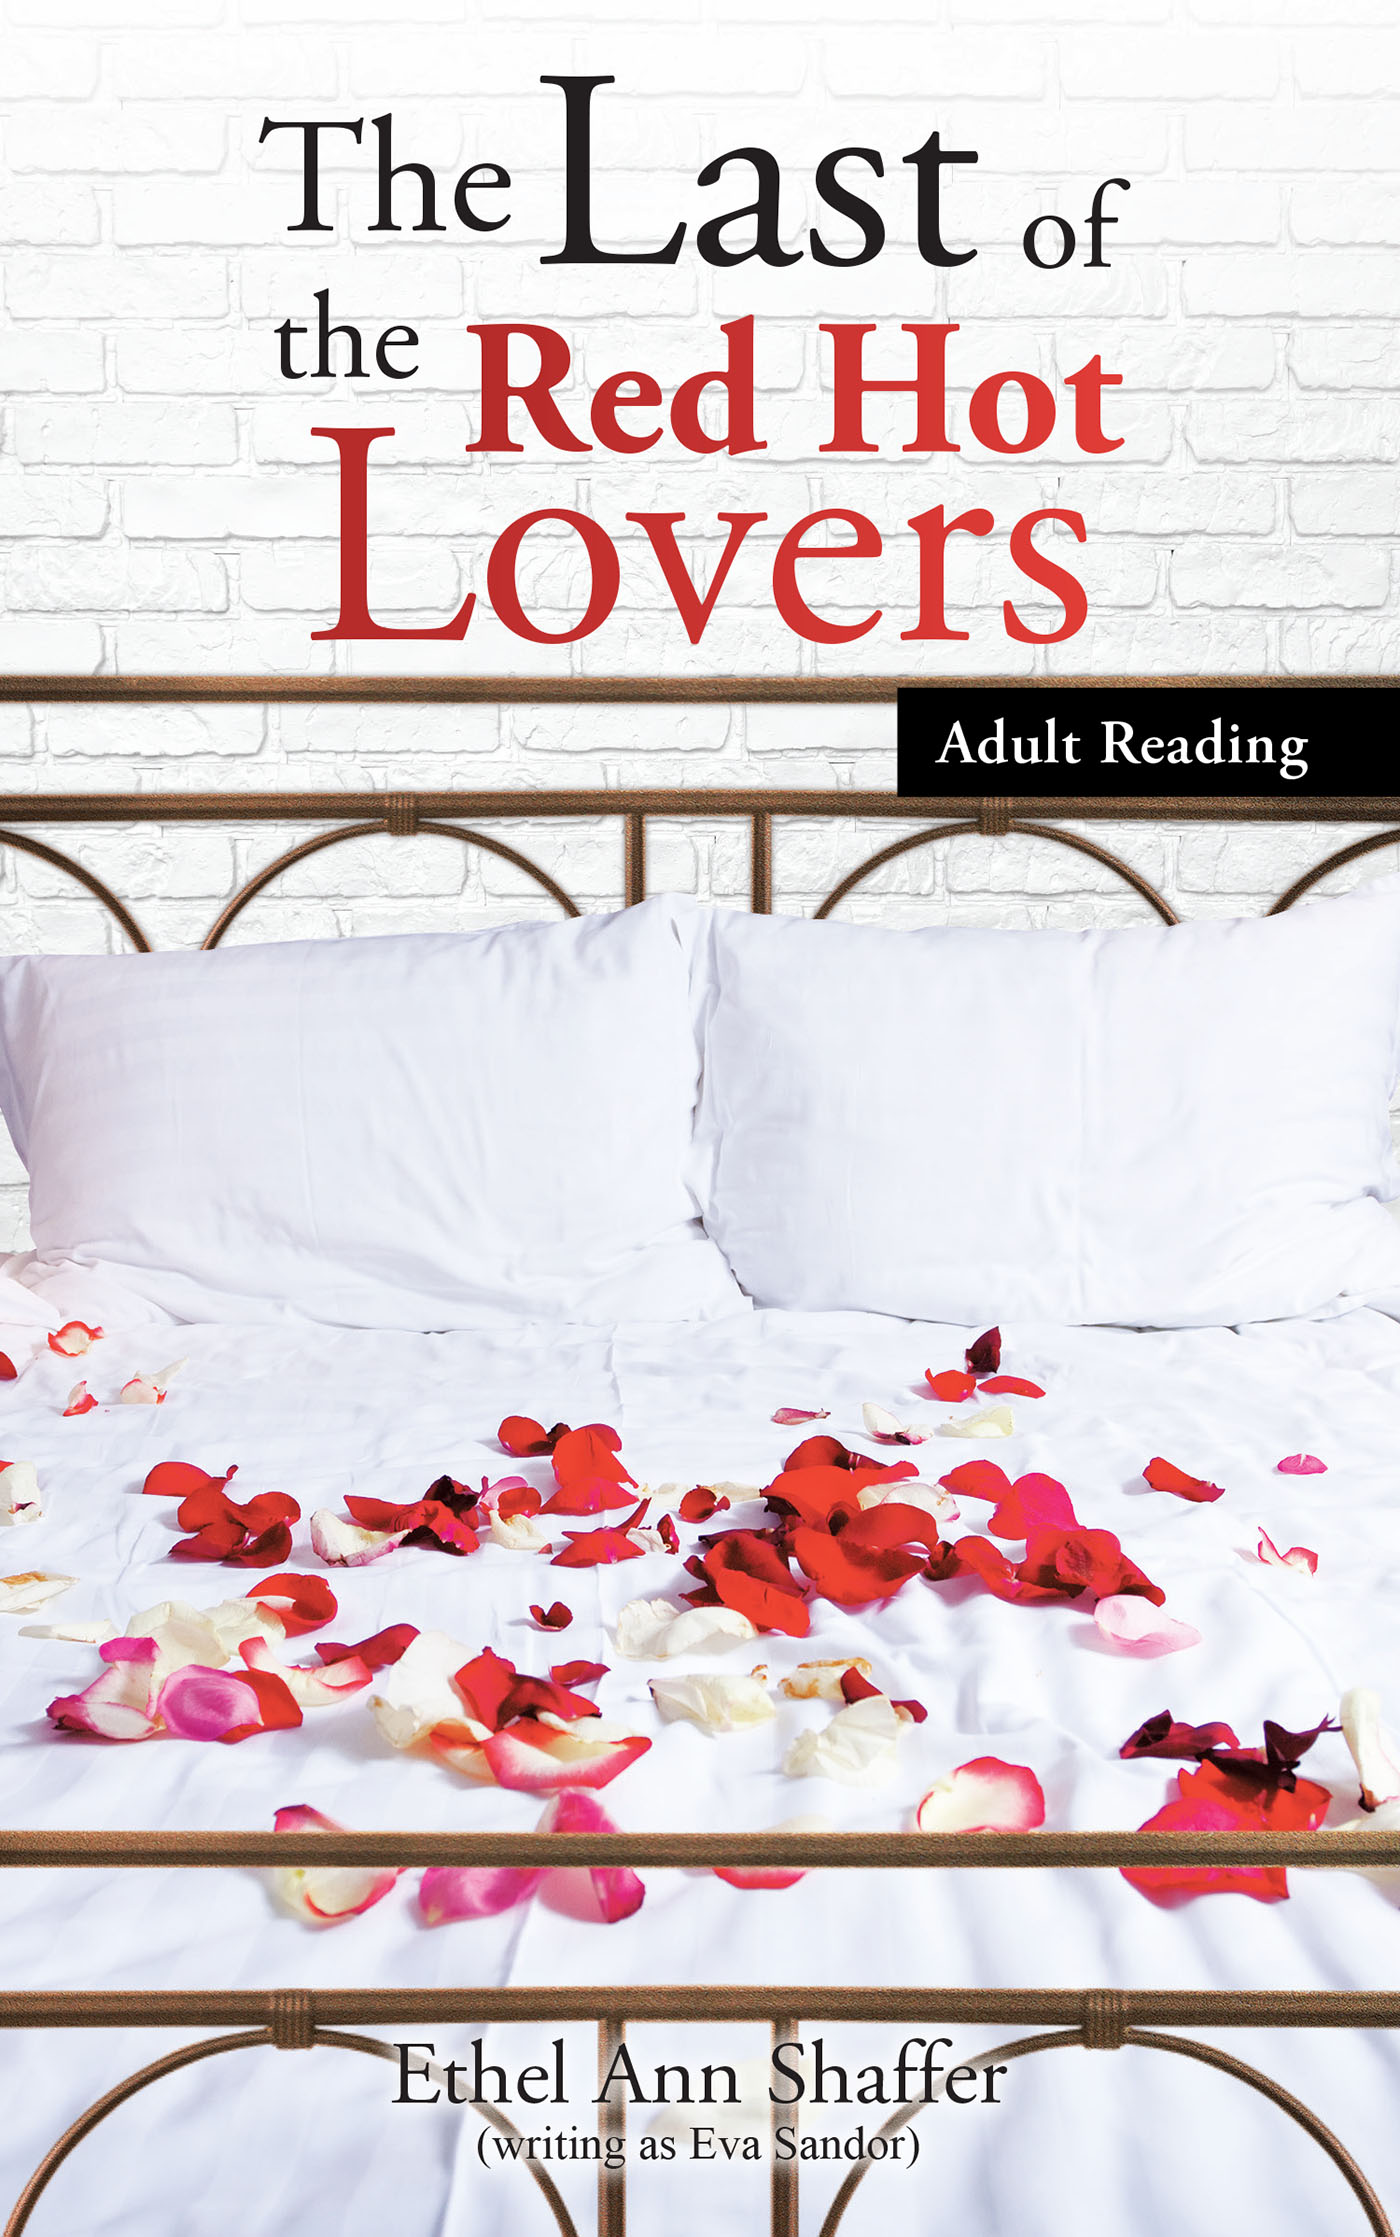 Author Ethel Ann Shaffer’s New Book, "The Last of the Red Hot Lovers," is a Steamy Memoir About the Truth of Falling in Love at Eighty